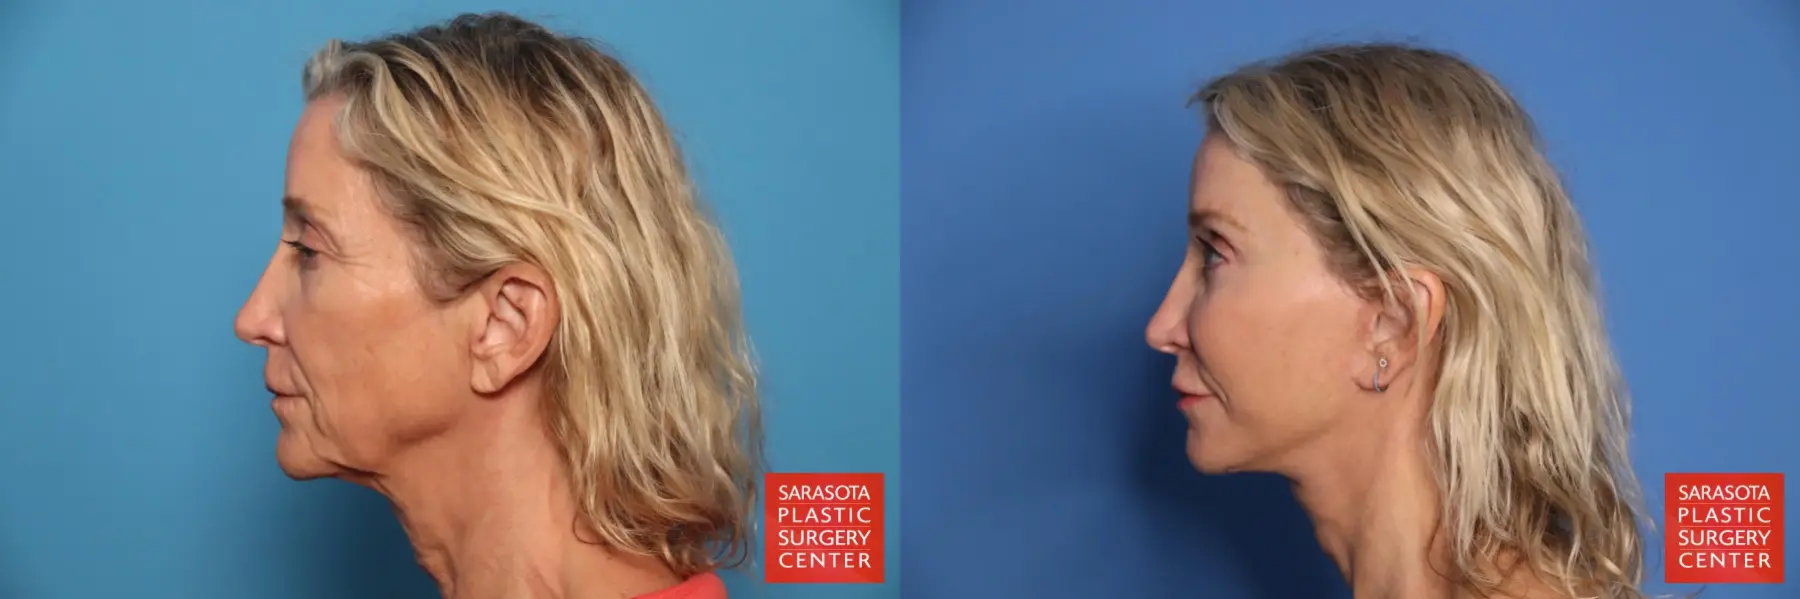 Facelift: Patient 2 - Before and After 3